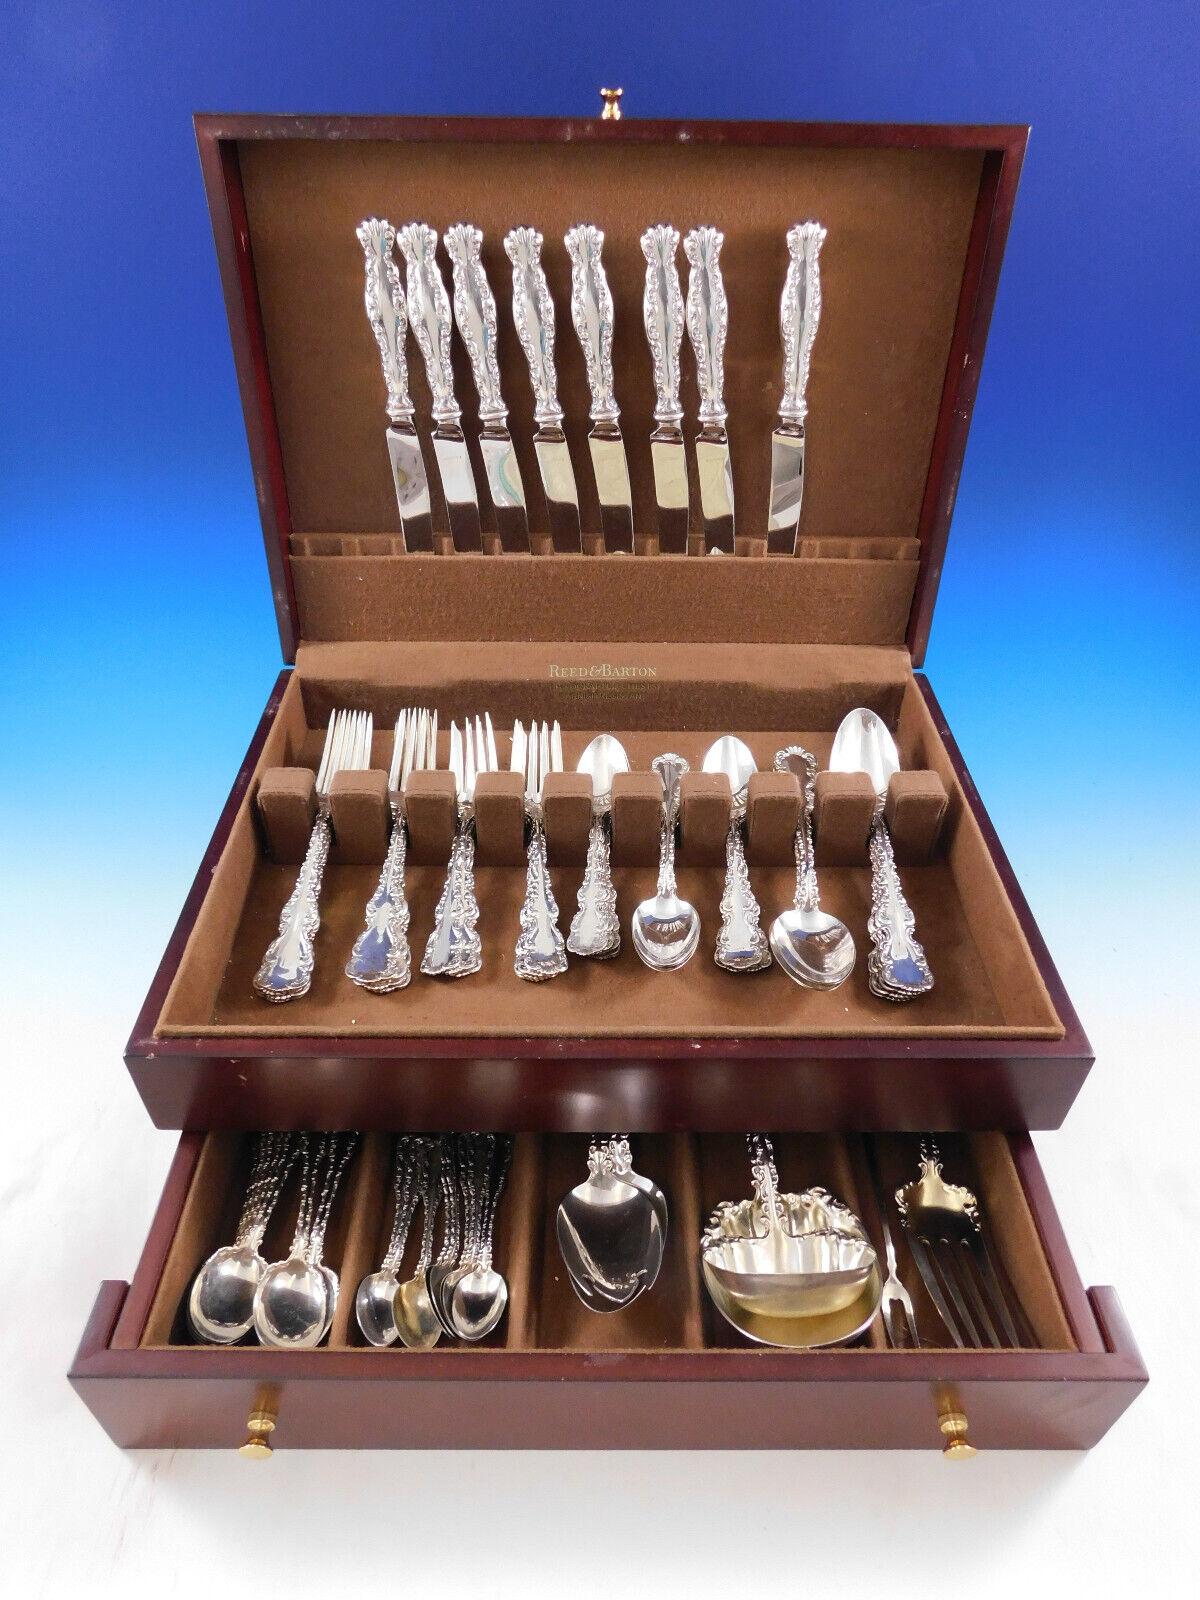 Louis XV by Whiting sterling silver flatware set - 70 pieces. This set includes:

8 knives, 8 7/8